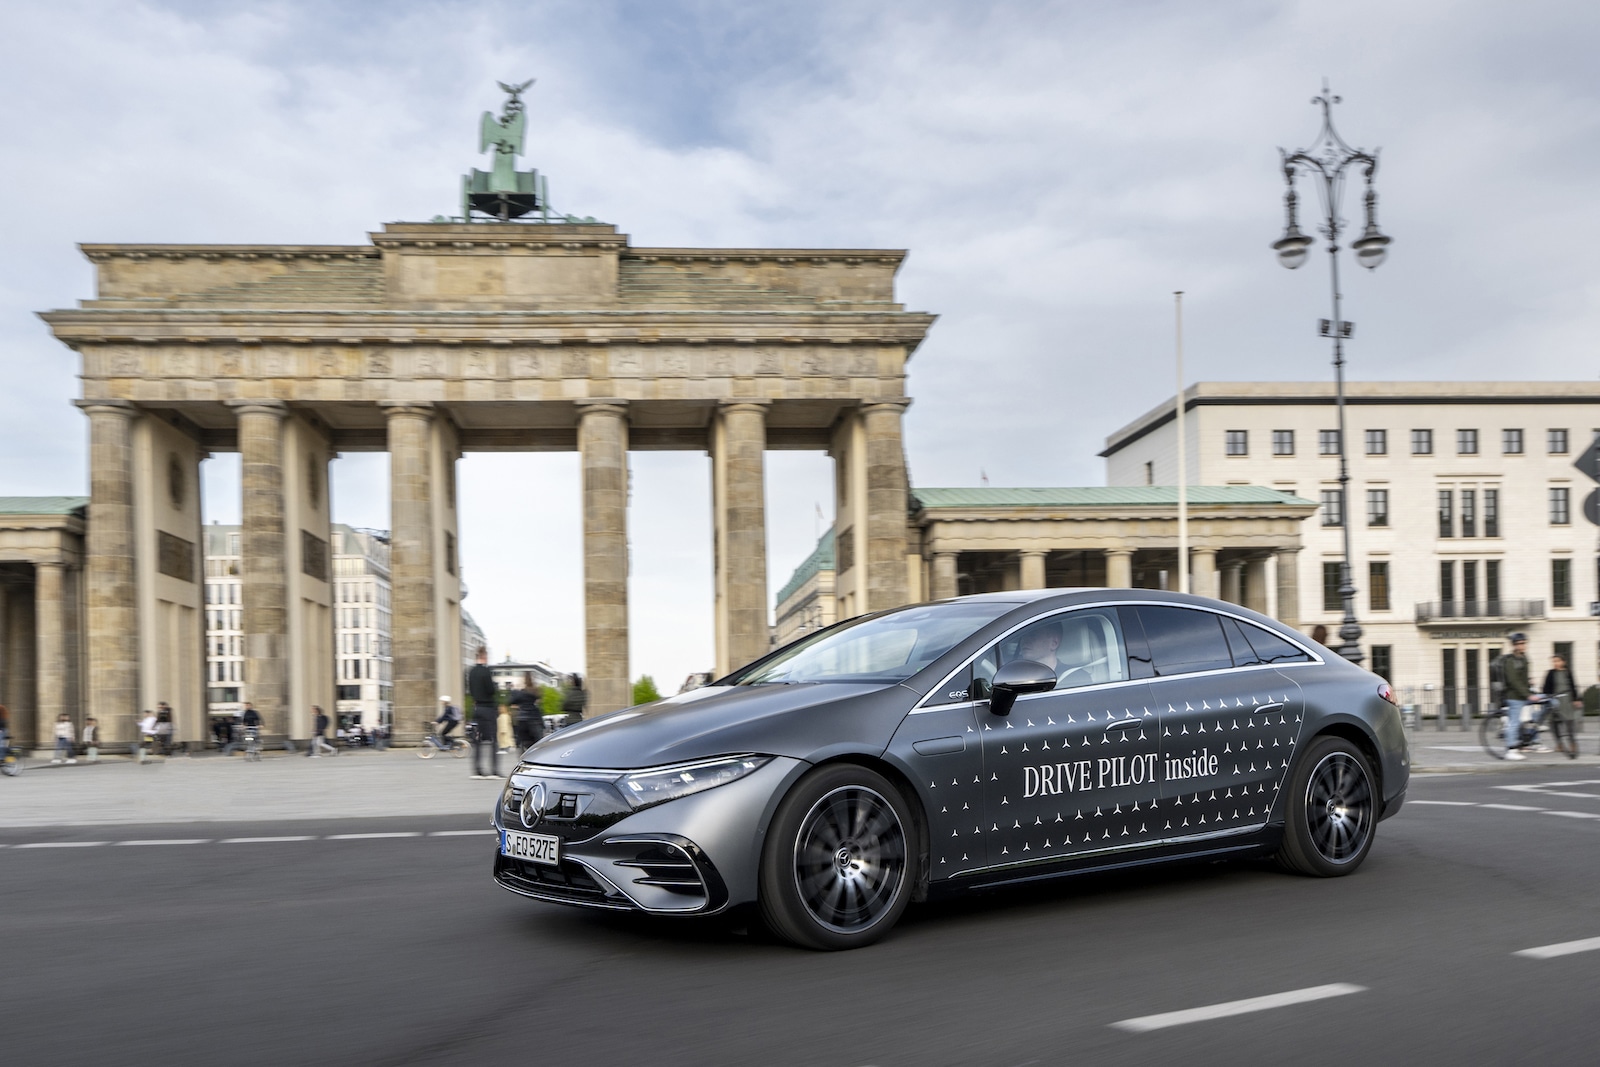 Mercedes-Benz Says Self-Driving Option Ready to Roll - The Detroit Bureau